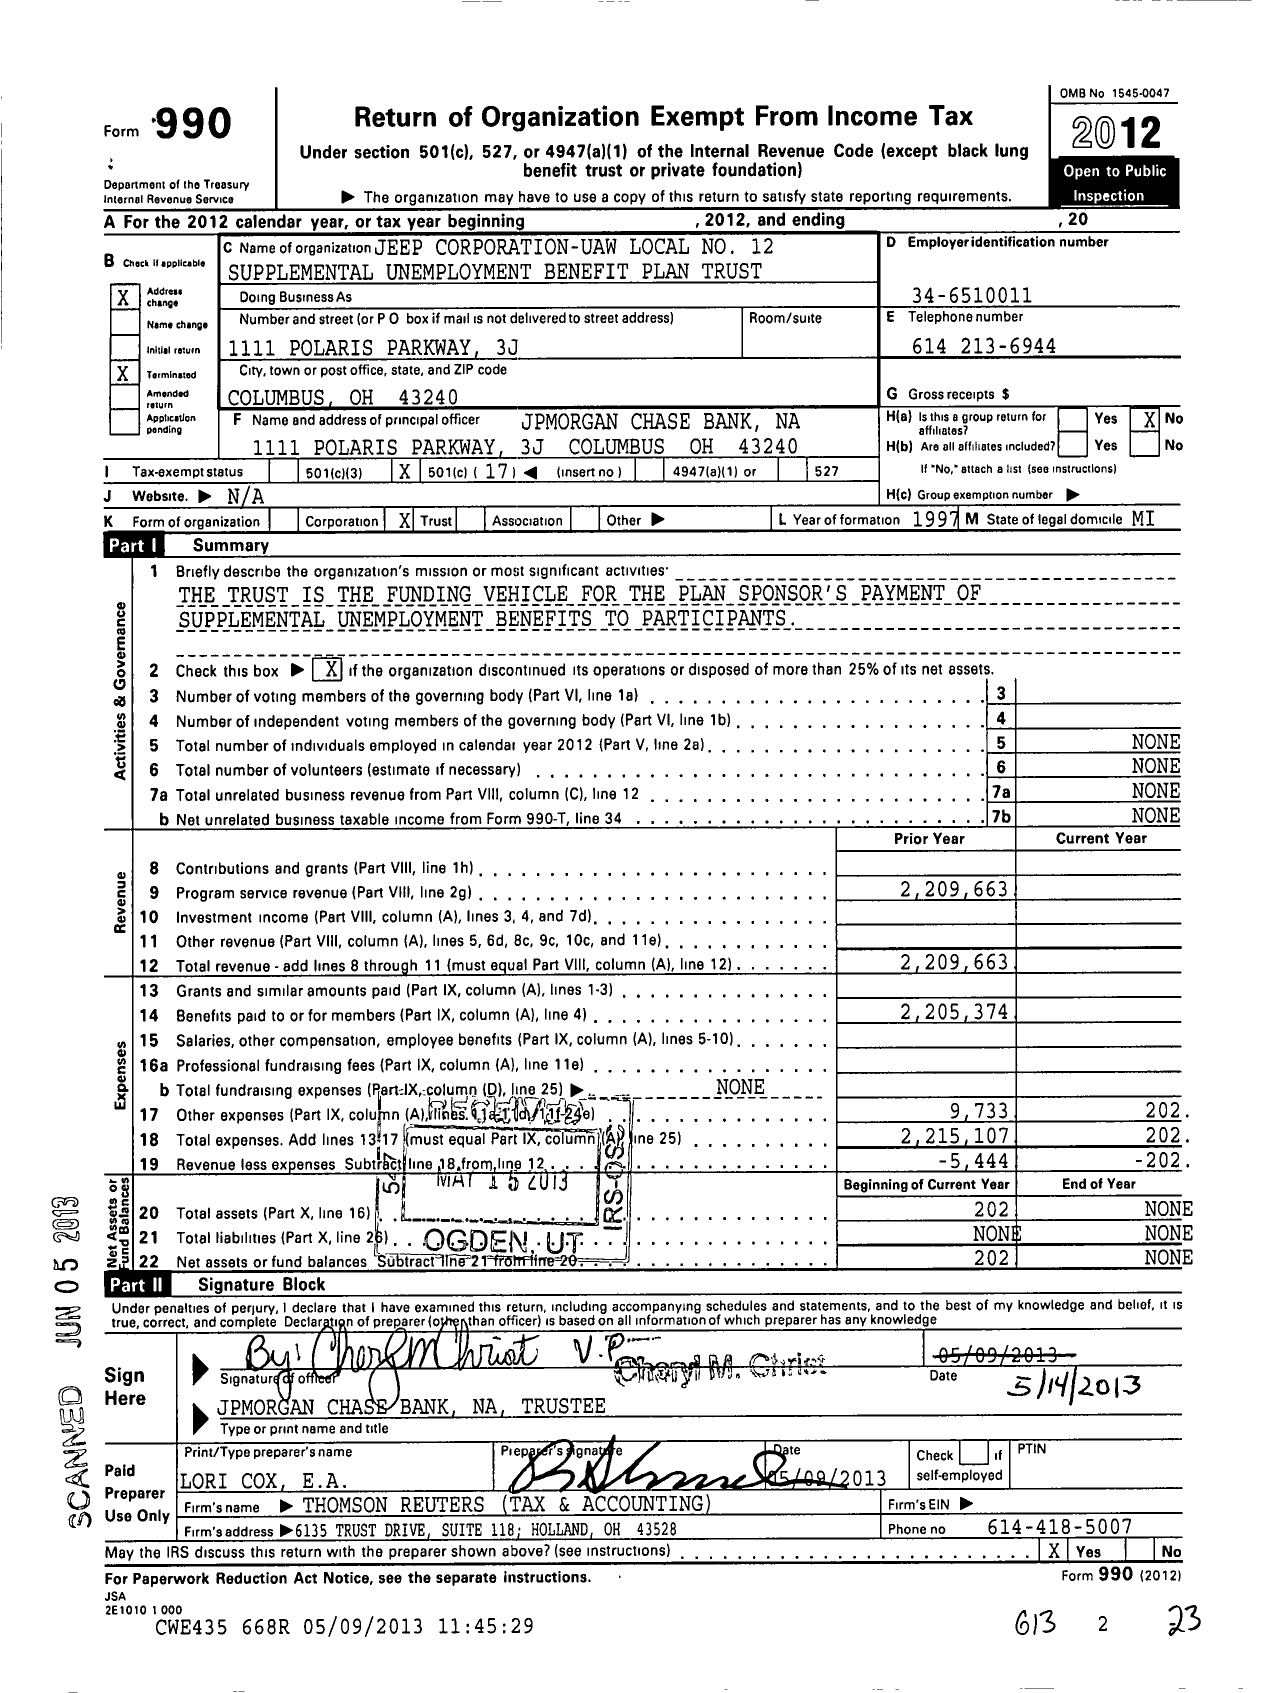 Image of first page of 2012 Form 990O for Jeep Corporation - Uaw Local No 12 Supplemental Unemployment Benefit Plan Trust